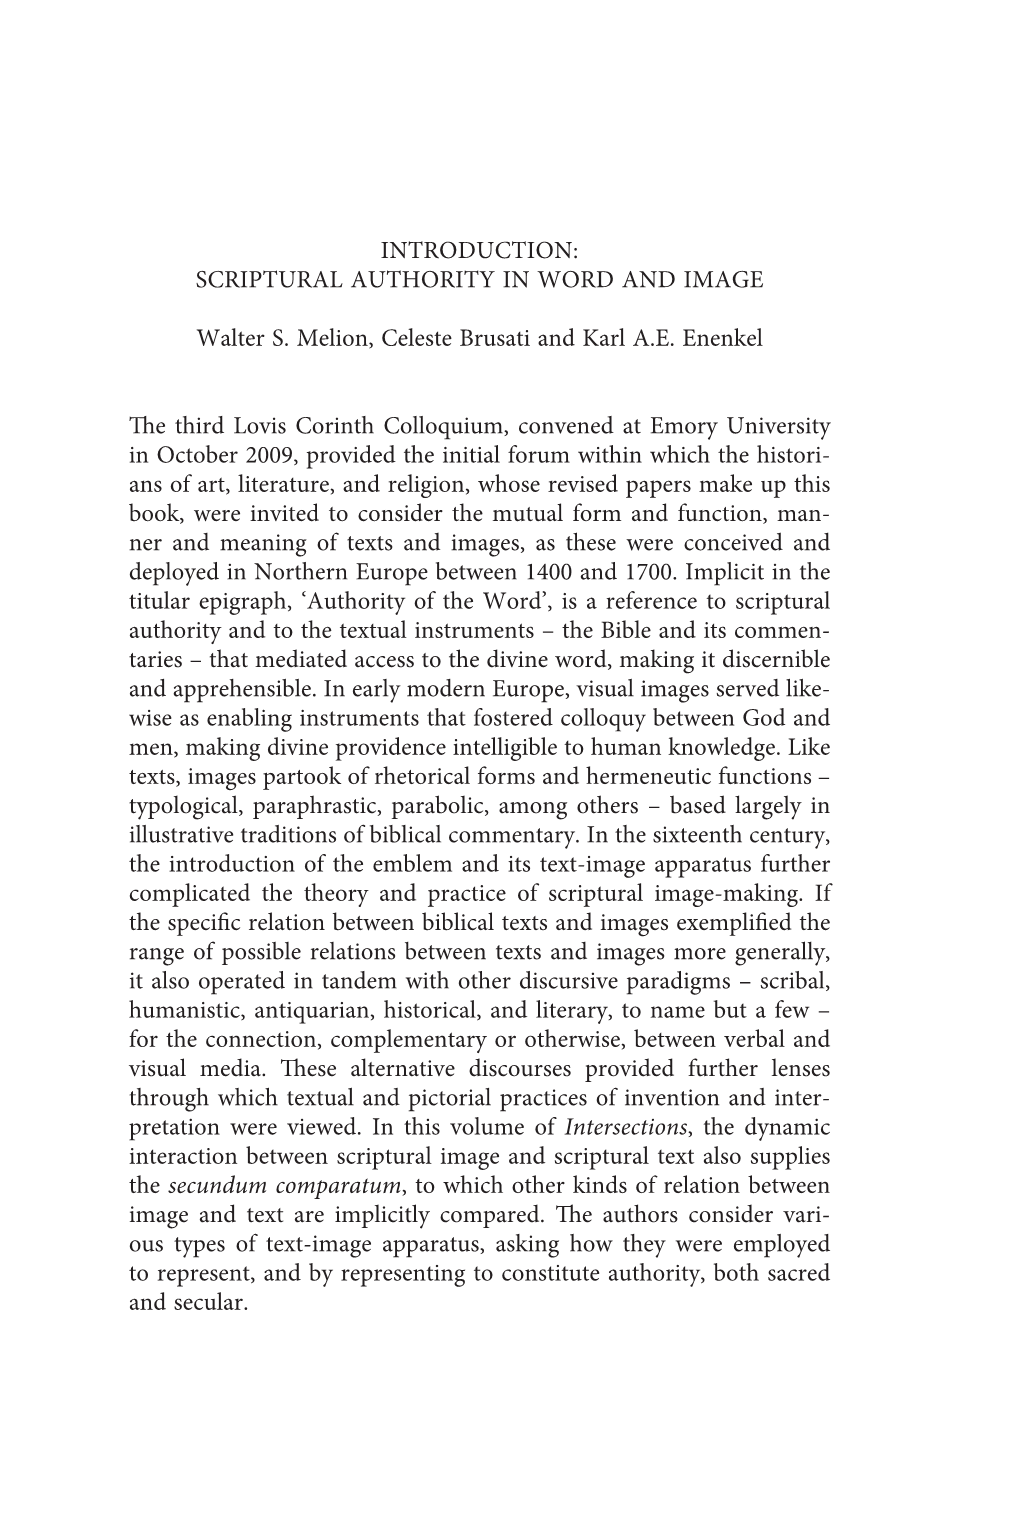 Introduction: Scriptural Authority in Word and Image